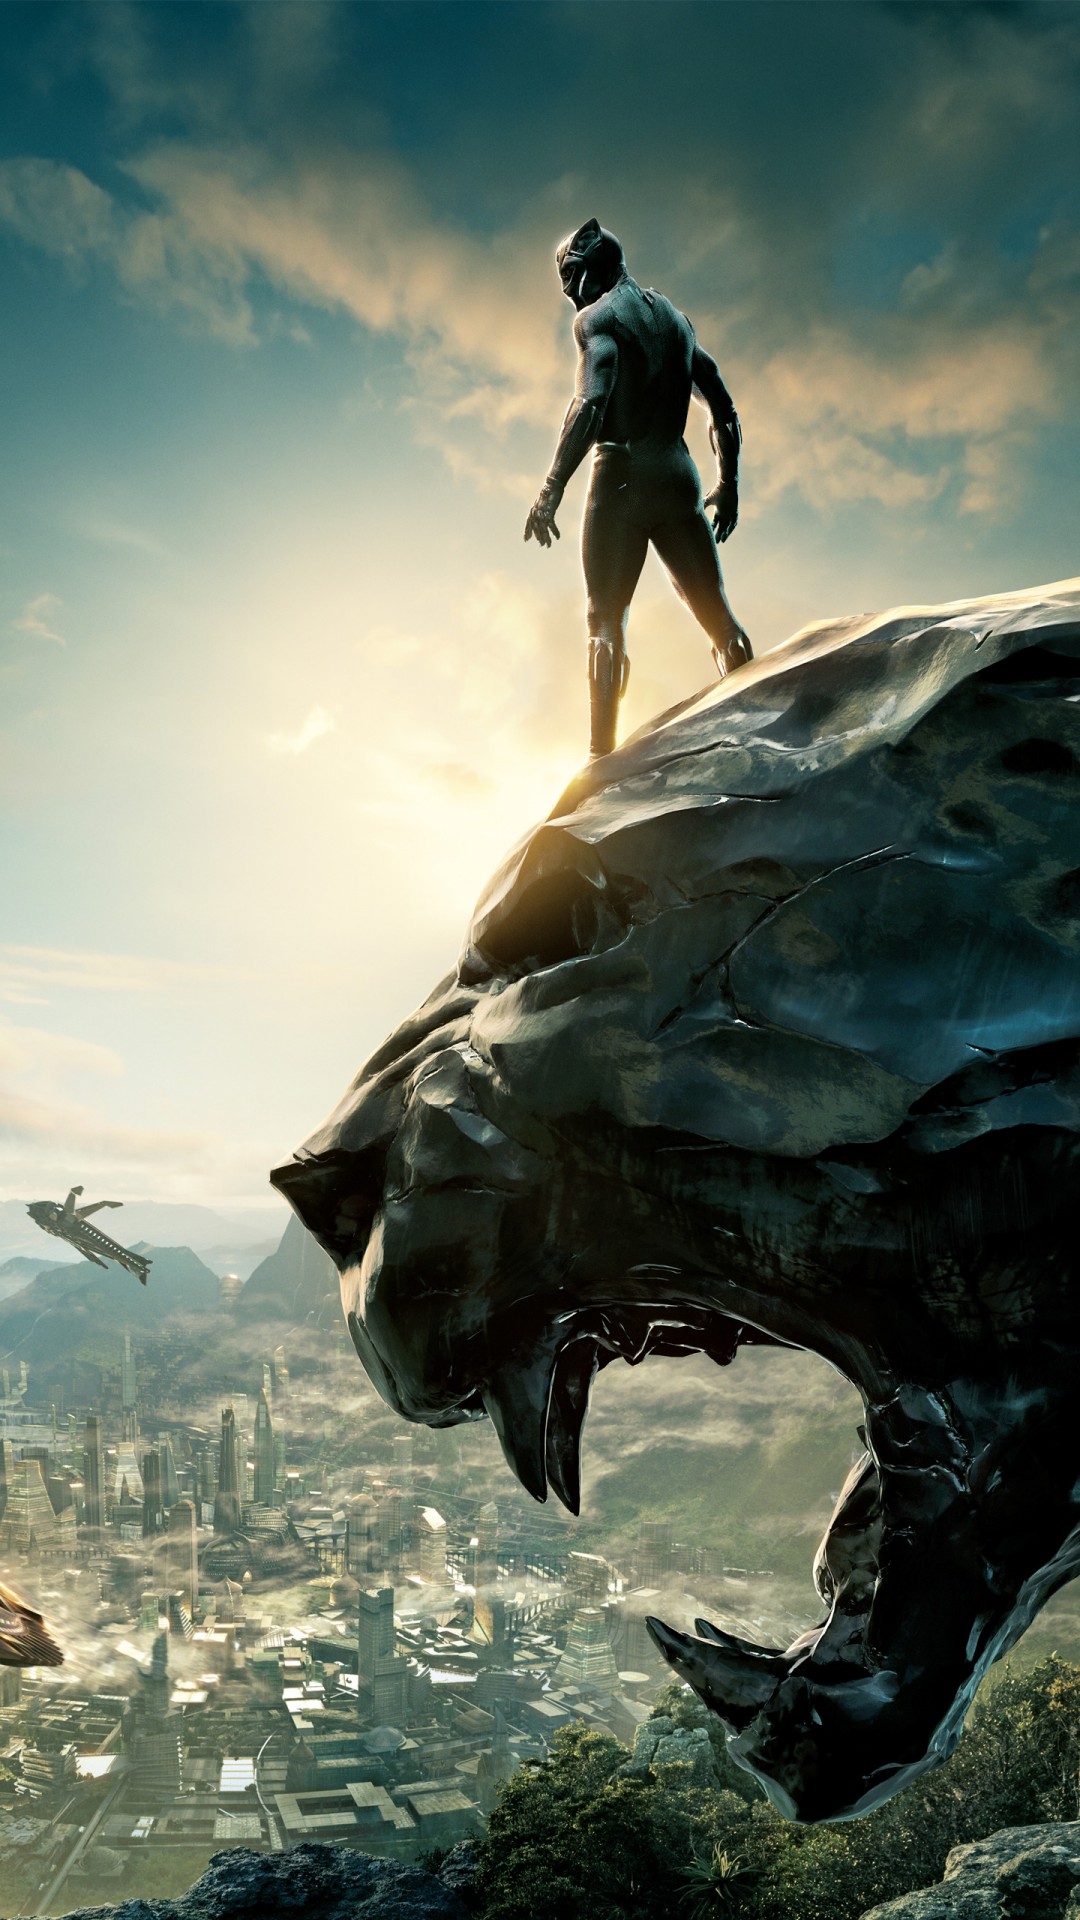 Black Panther 2018 4k Wallpaper Hd - 4k Hd Wallpapers For Android , HD Wallpaper & Backgrounds